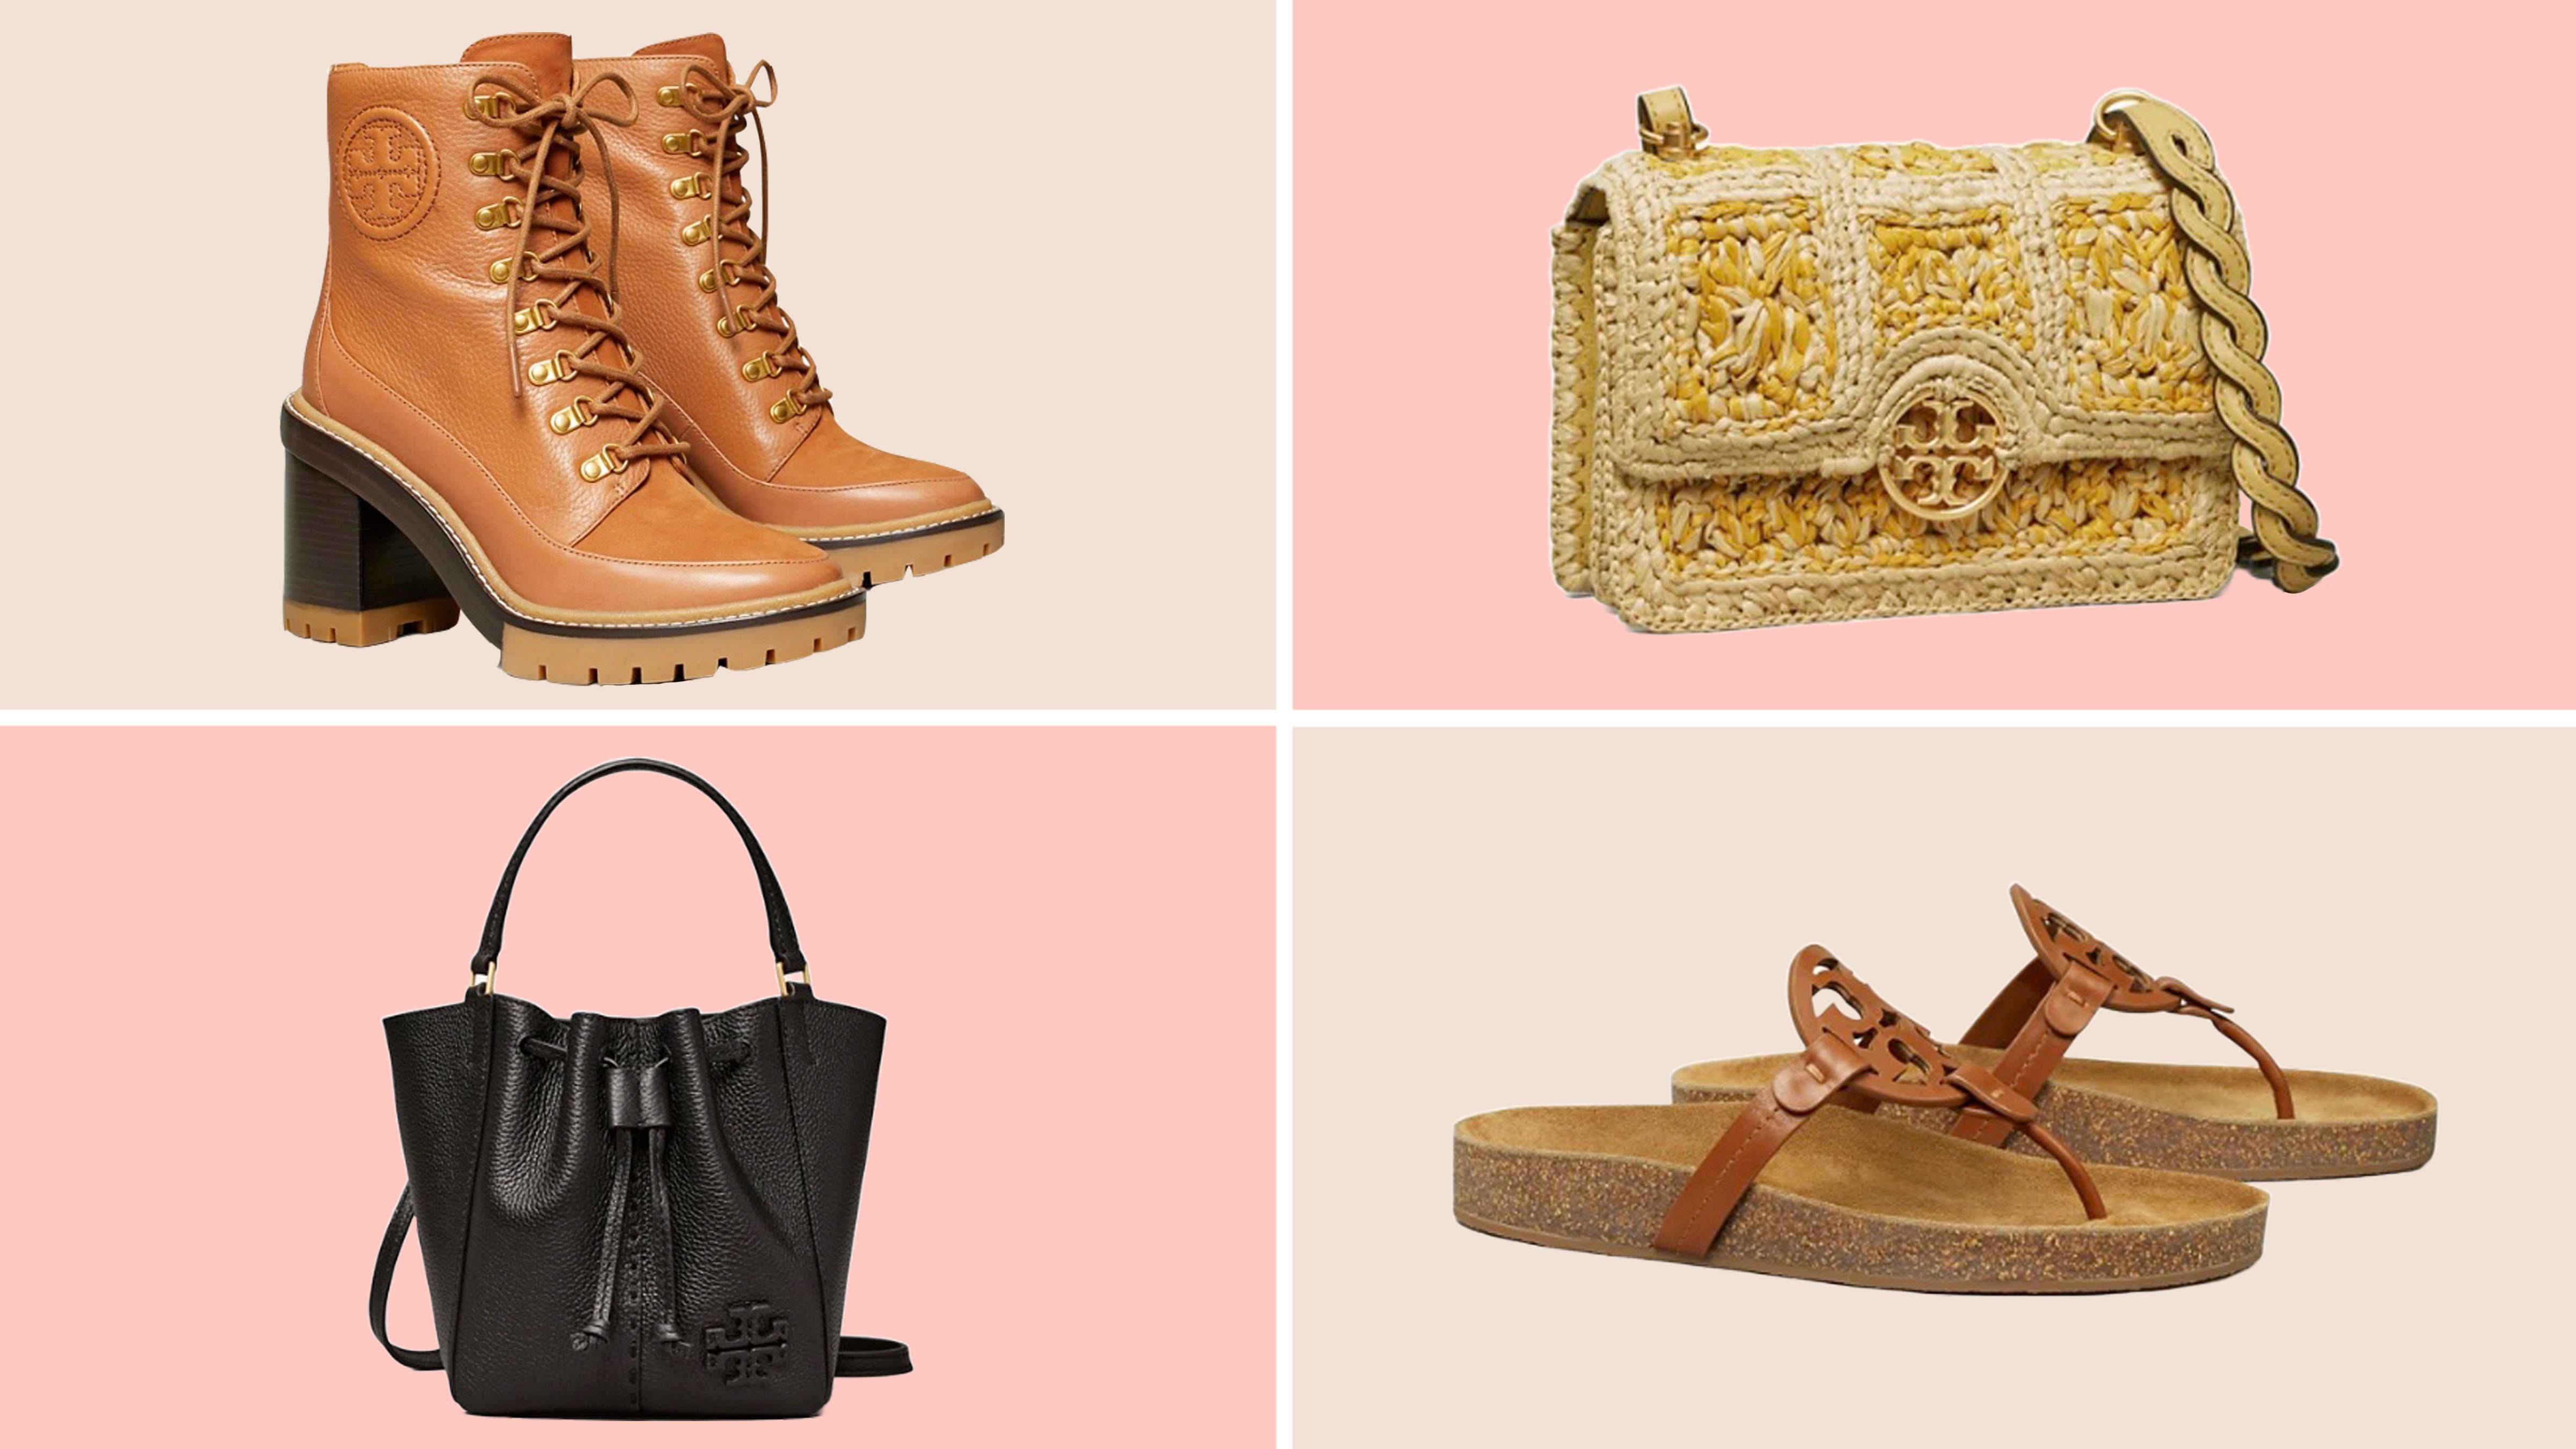 Tory Burch sale: Get an extra 25% off purses, dresses and shoes